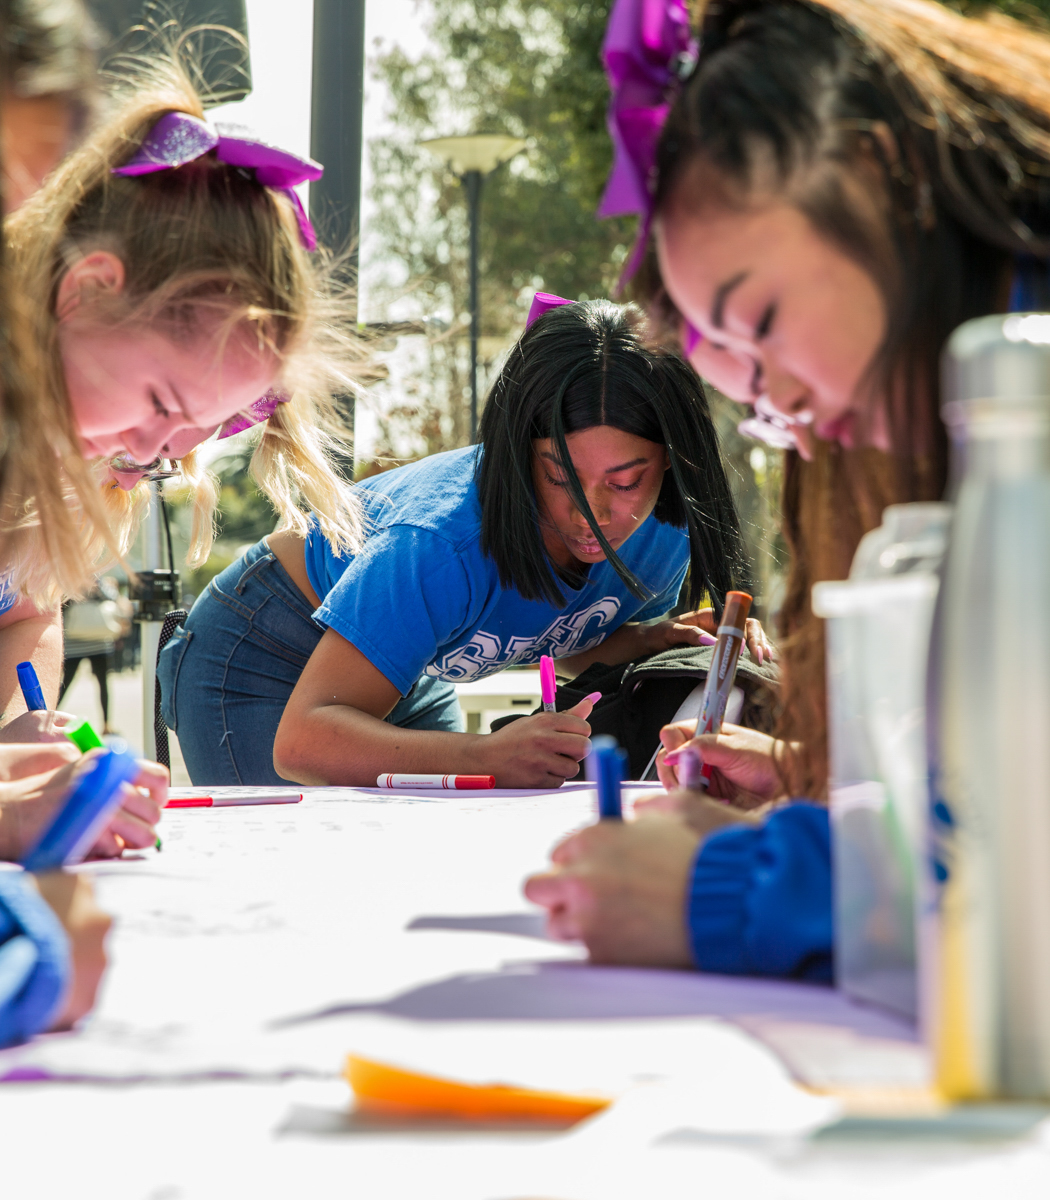  Santa Monica College (SMC) student Winnie Marcelin (center), a freshman communication studies major and a member of the SMC cheer squad, takes part in the SMC Women’s Day event by being focused while writing about the women in her life that inspire 